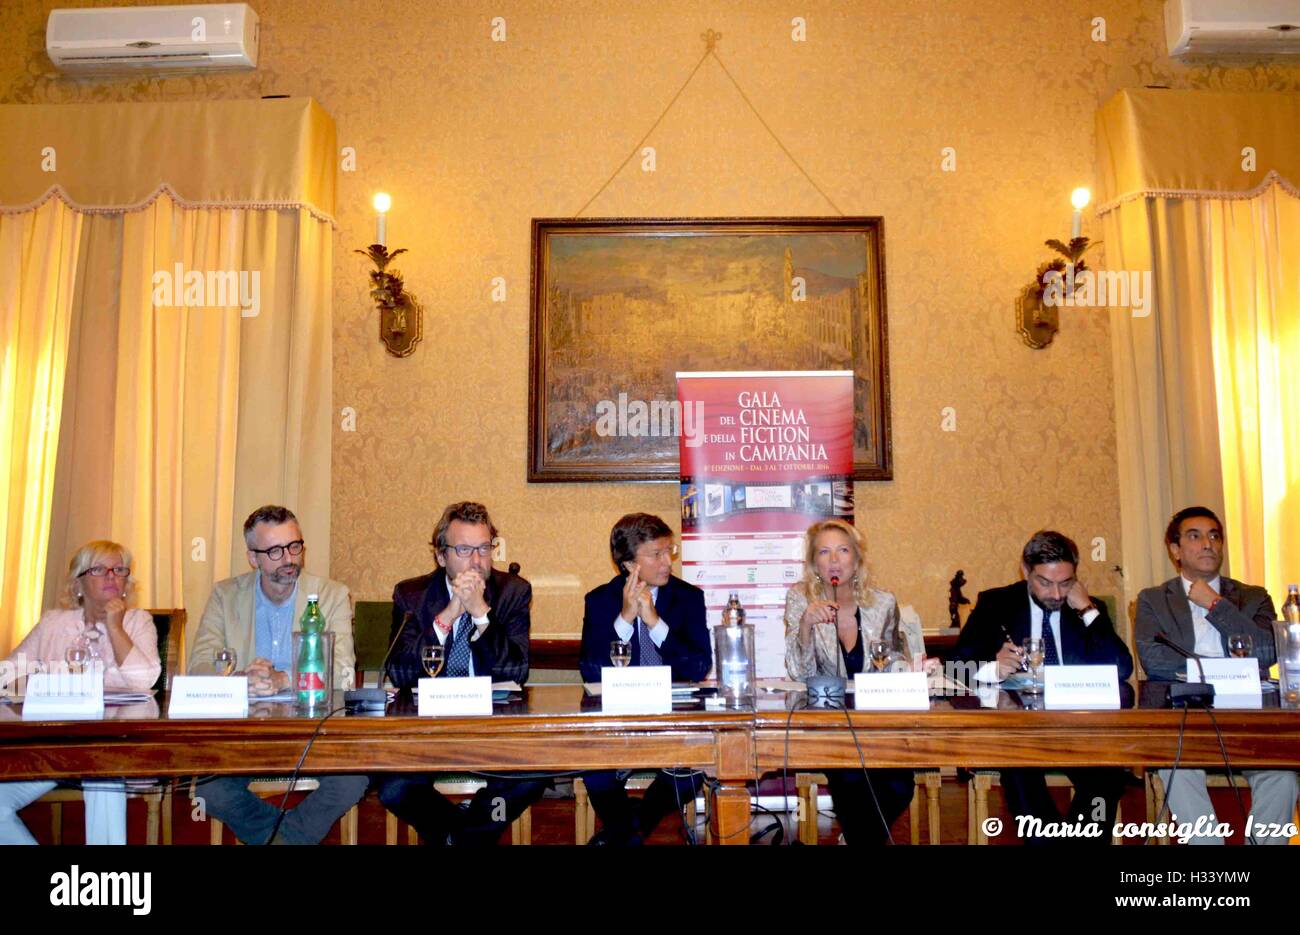 Naples, Italy. 03rd Oct, 2016. The press conference to present the eighth edition of 'Gala Cinema Fiction' was held this morning in Naples (at the headquarters of the Industrial Union). The event will take place in Campania (Castellammare di Stabia) October 3 to 7. The festival was conceived and produced by Valeria Della Rocca, under the artistic direction of Marco Spagnoli. The event has the objective of enhancing the artistic and natural resources of the Campania Region. © Maria Consiglia Izzo/Pacific Press/Alamy Live News Stock Photo